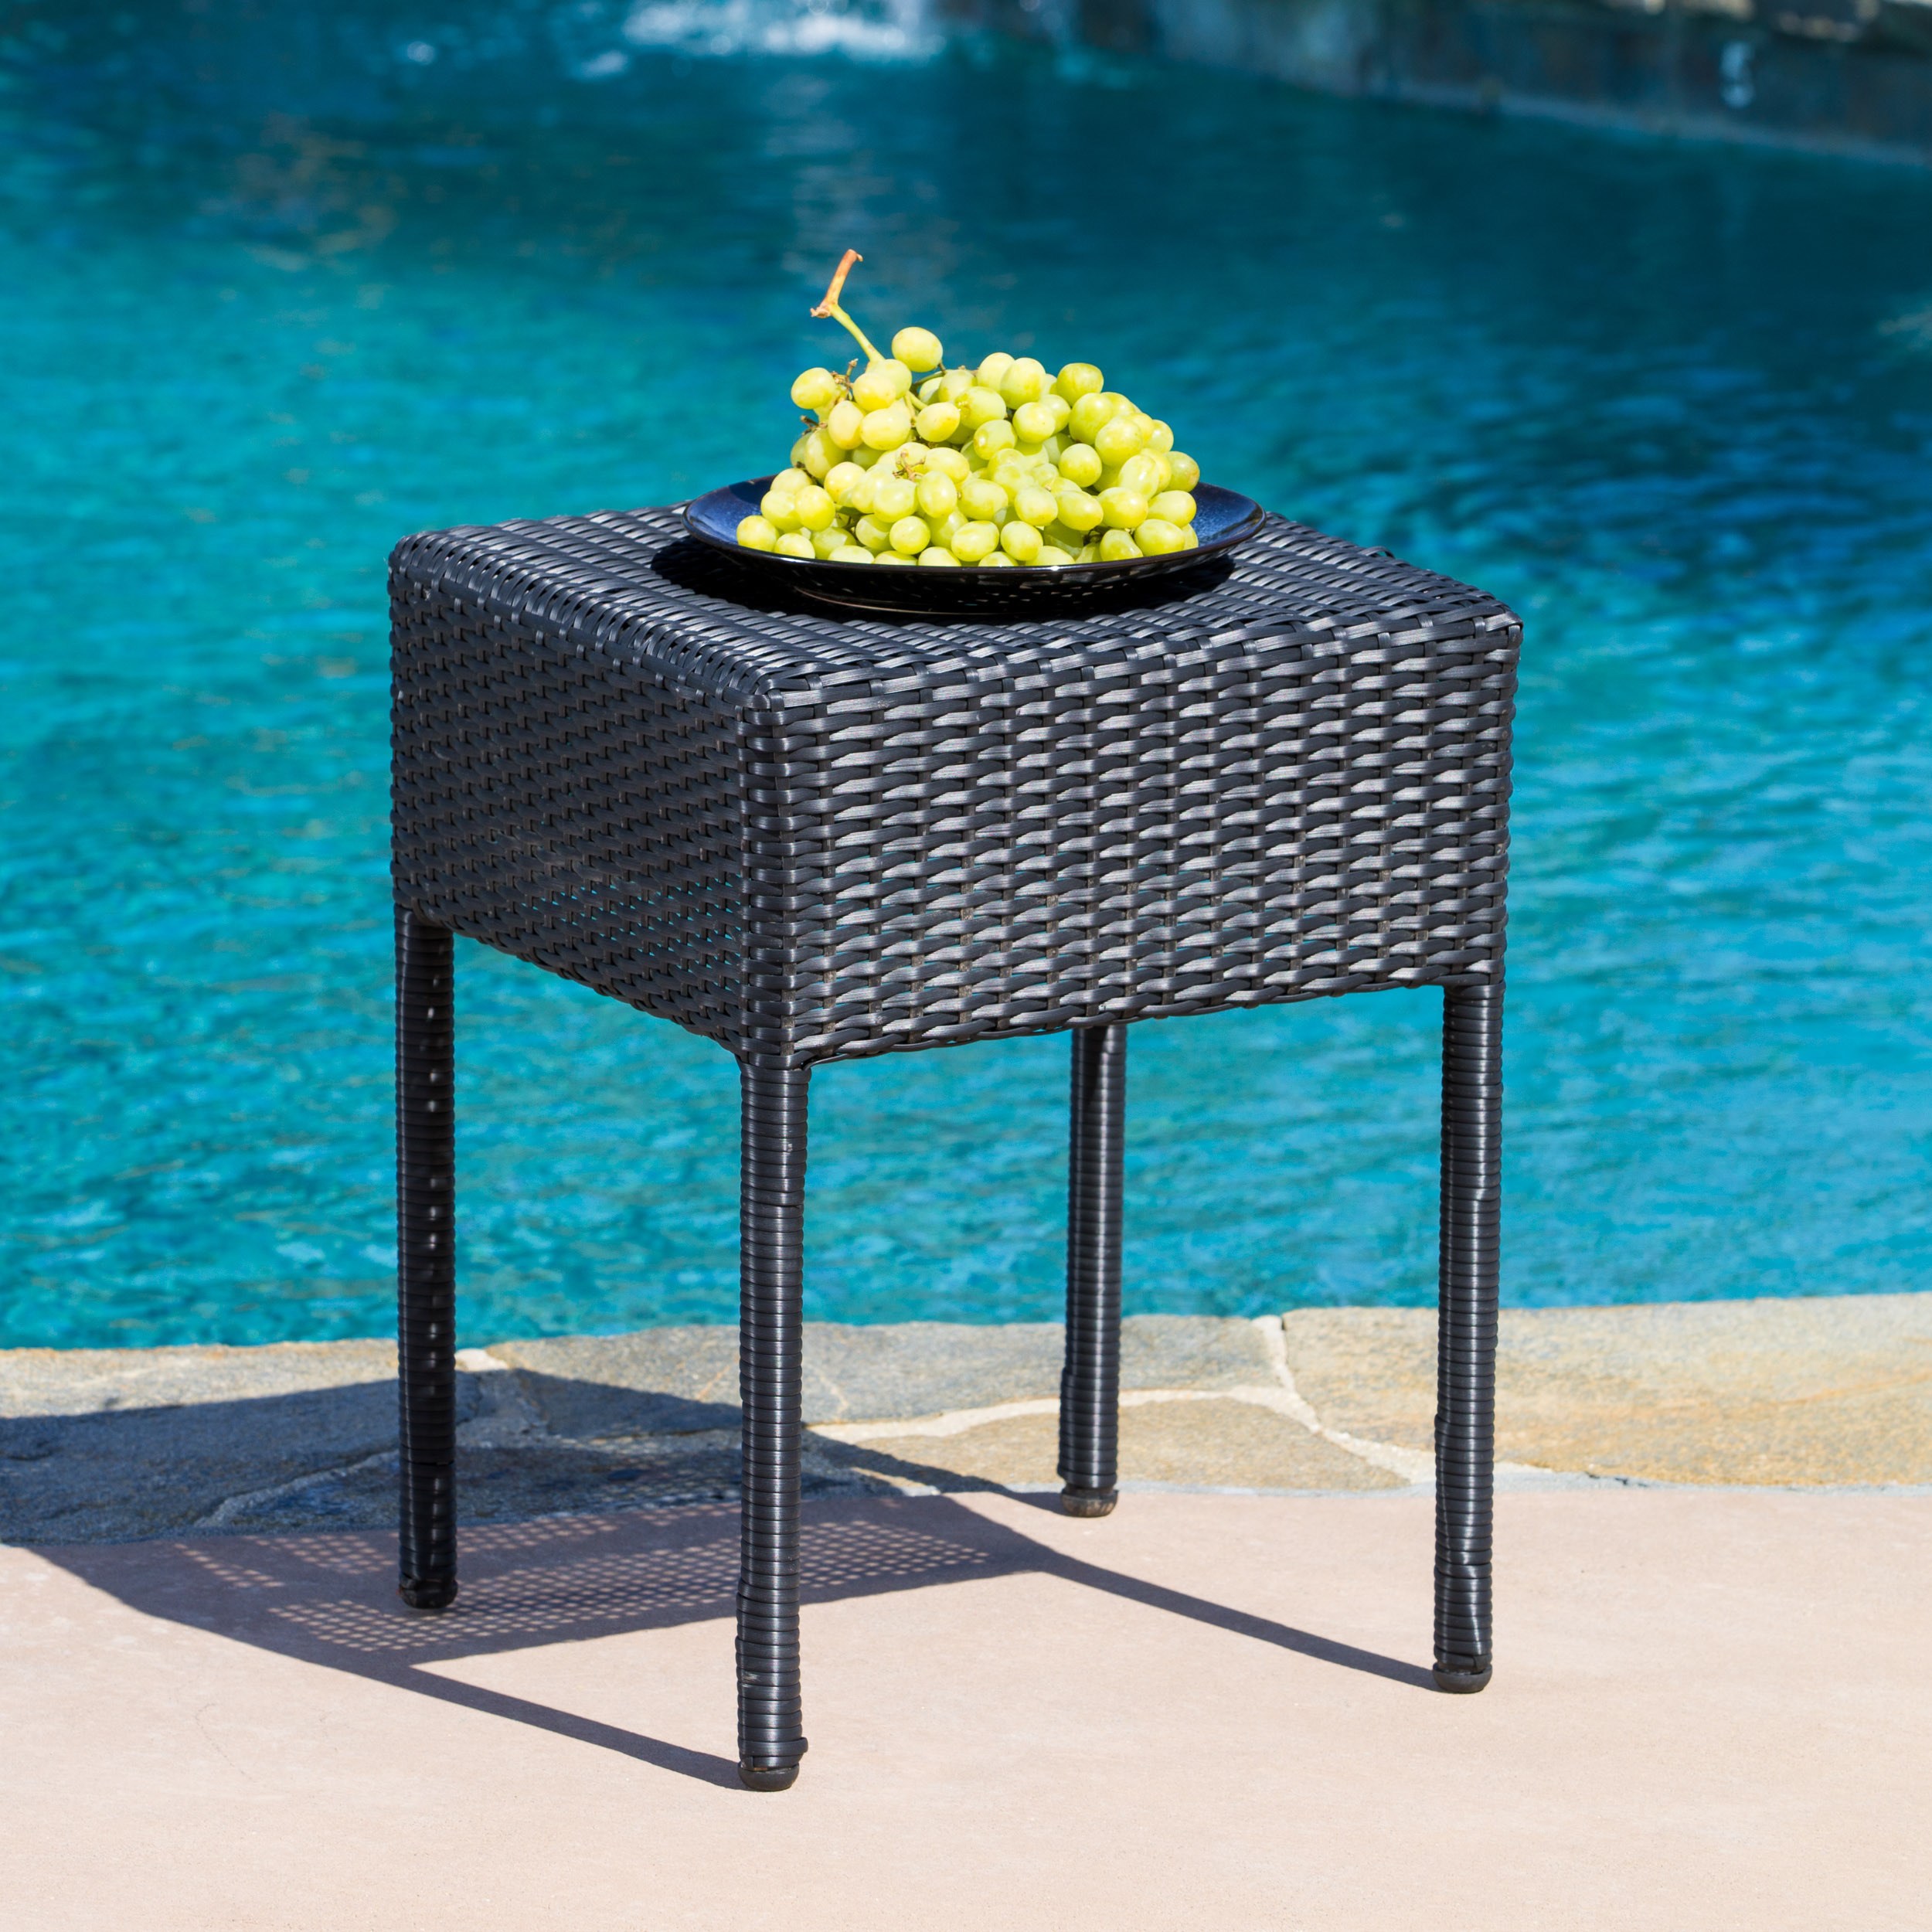 sadie wicker outdoor side table prod accent metal console legs patio furniture with umbrella coffee folding ikea round drop leaf white half moon small black occasional vintage